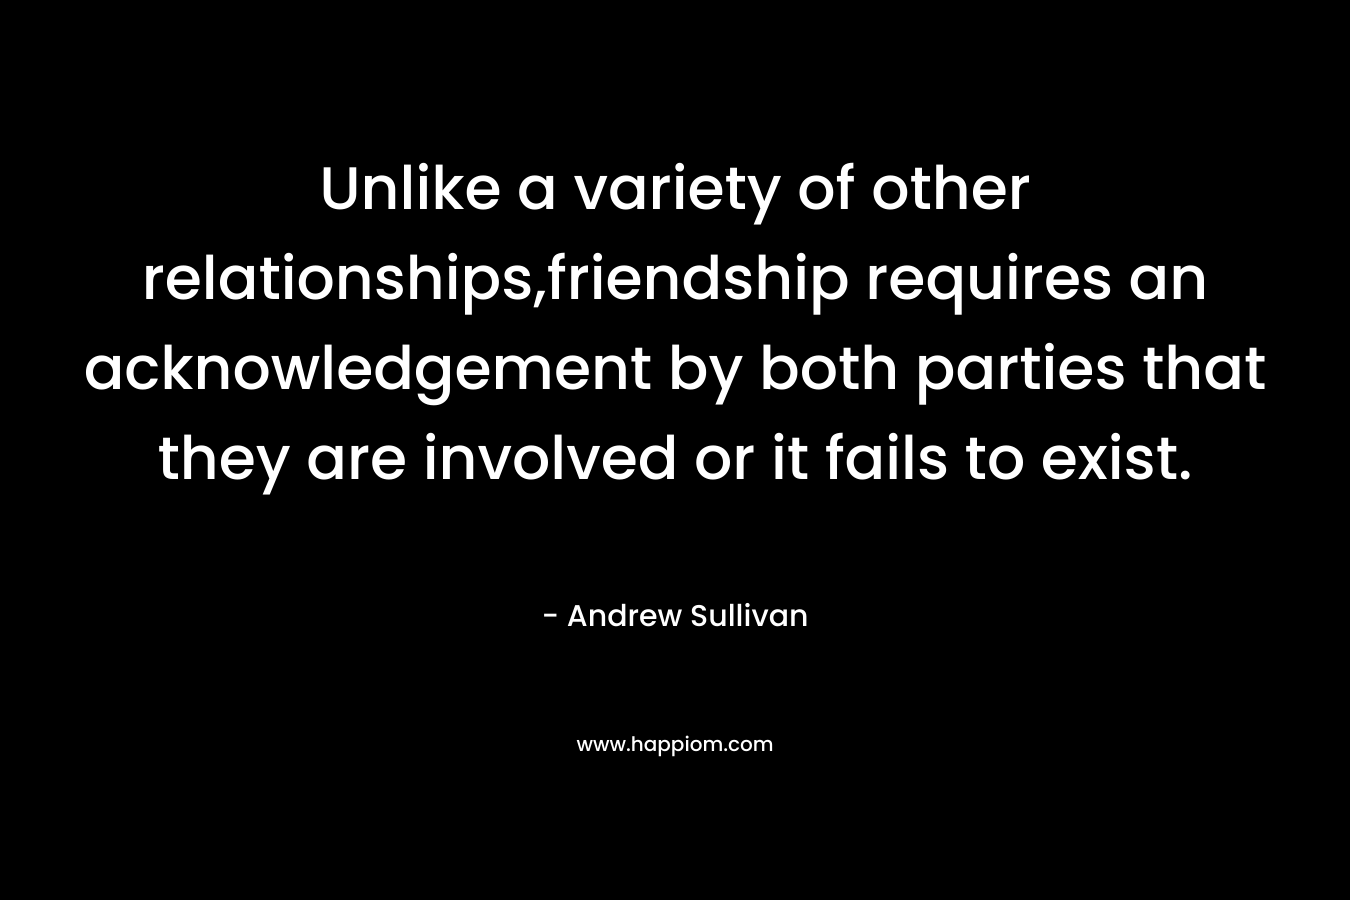 Unlike a variety of other relationships,friendship requires an acknowledgement by both parties that they are involved or it fails to exist. – Andrew Sullivan